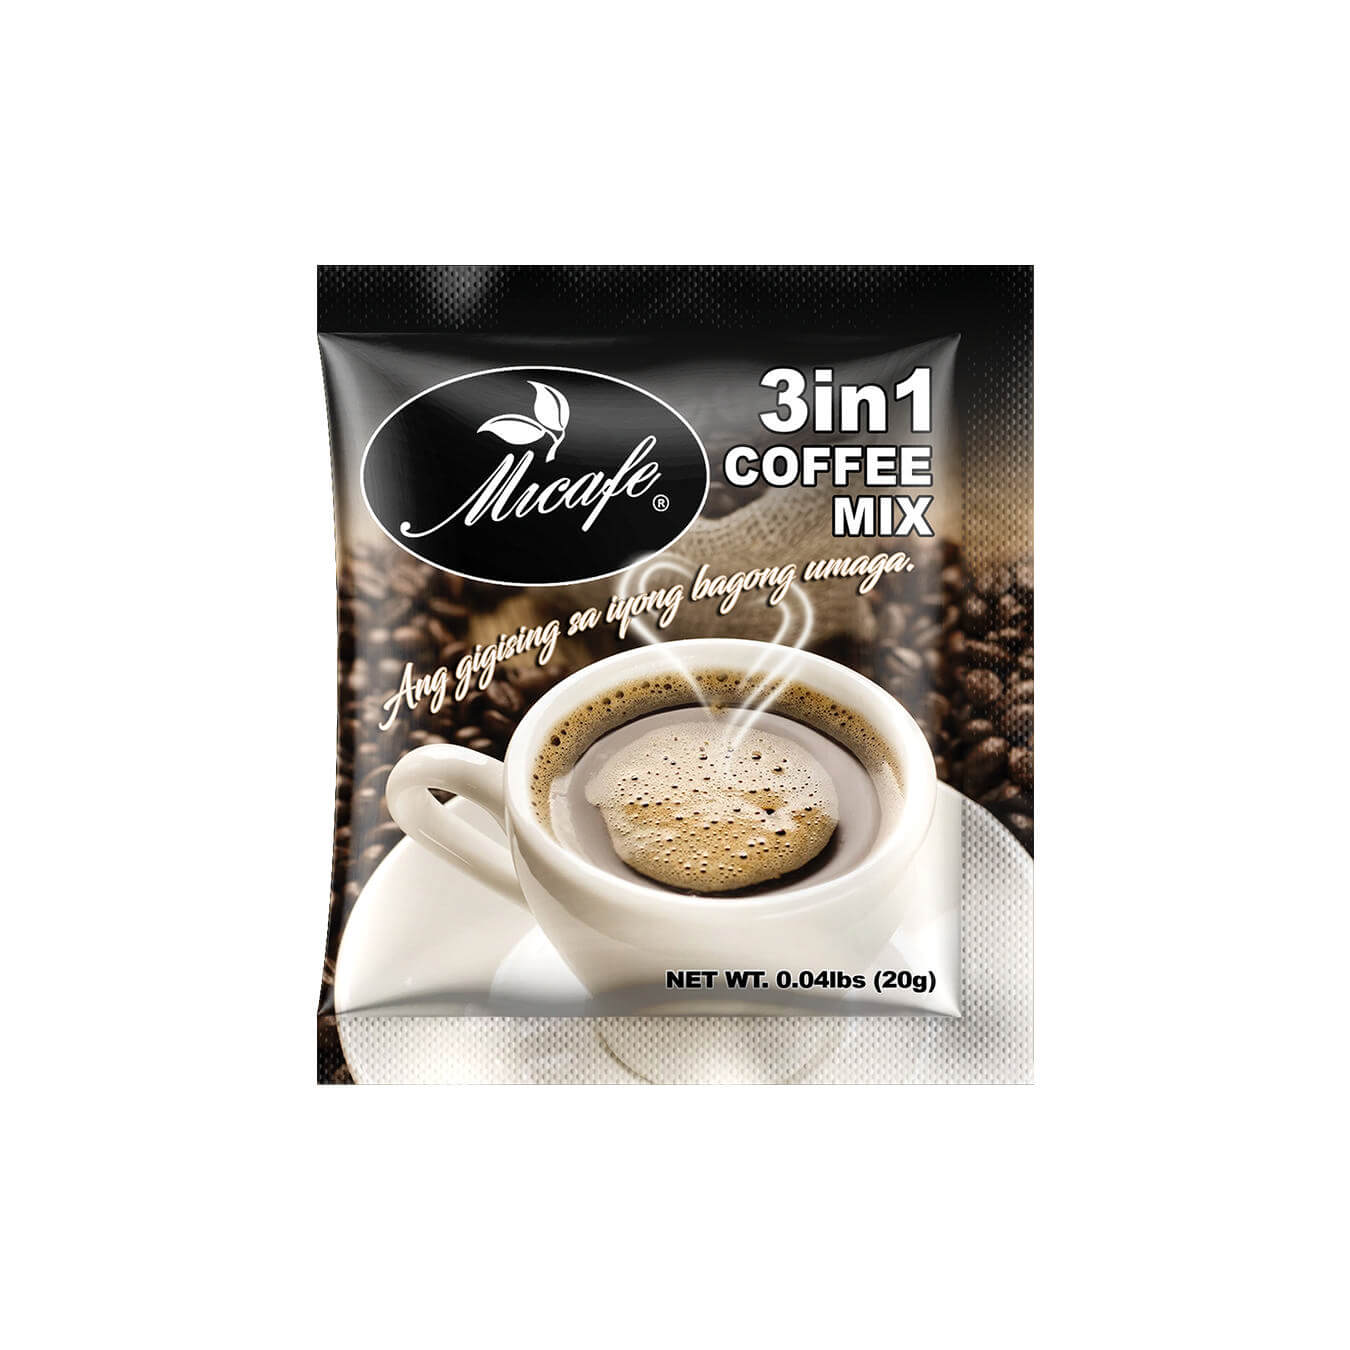 3in1 Coffee Mix